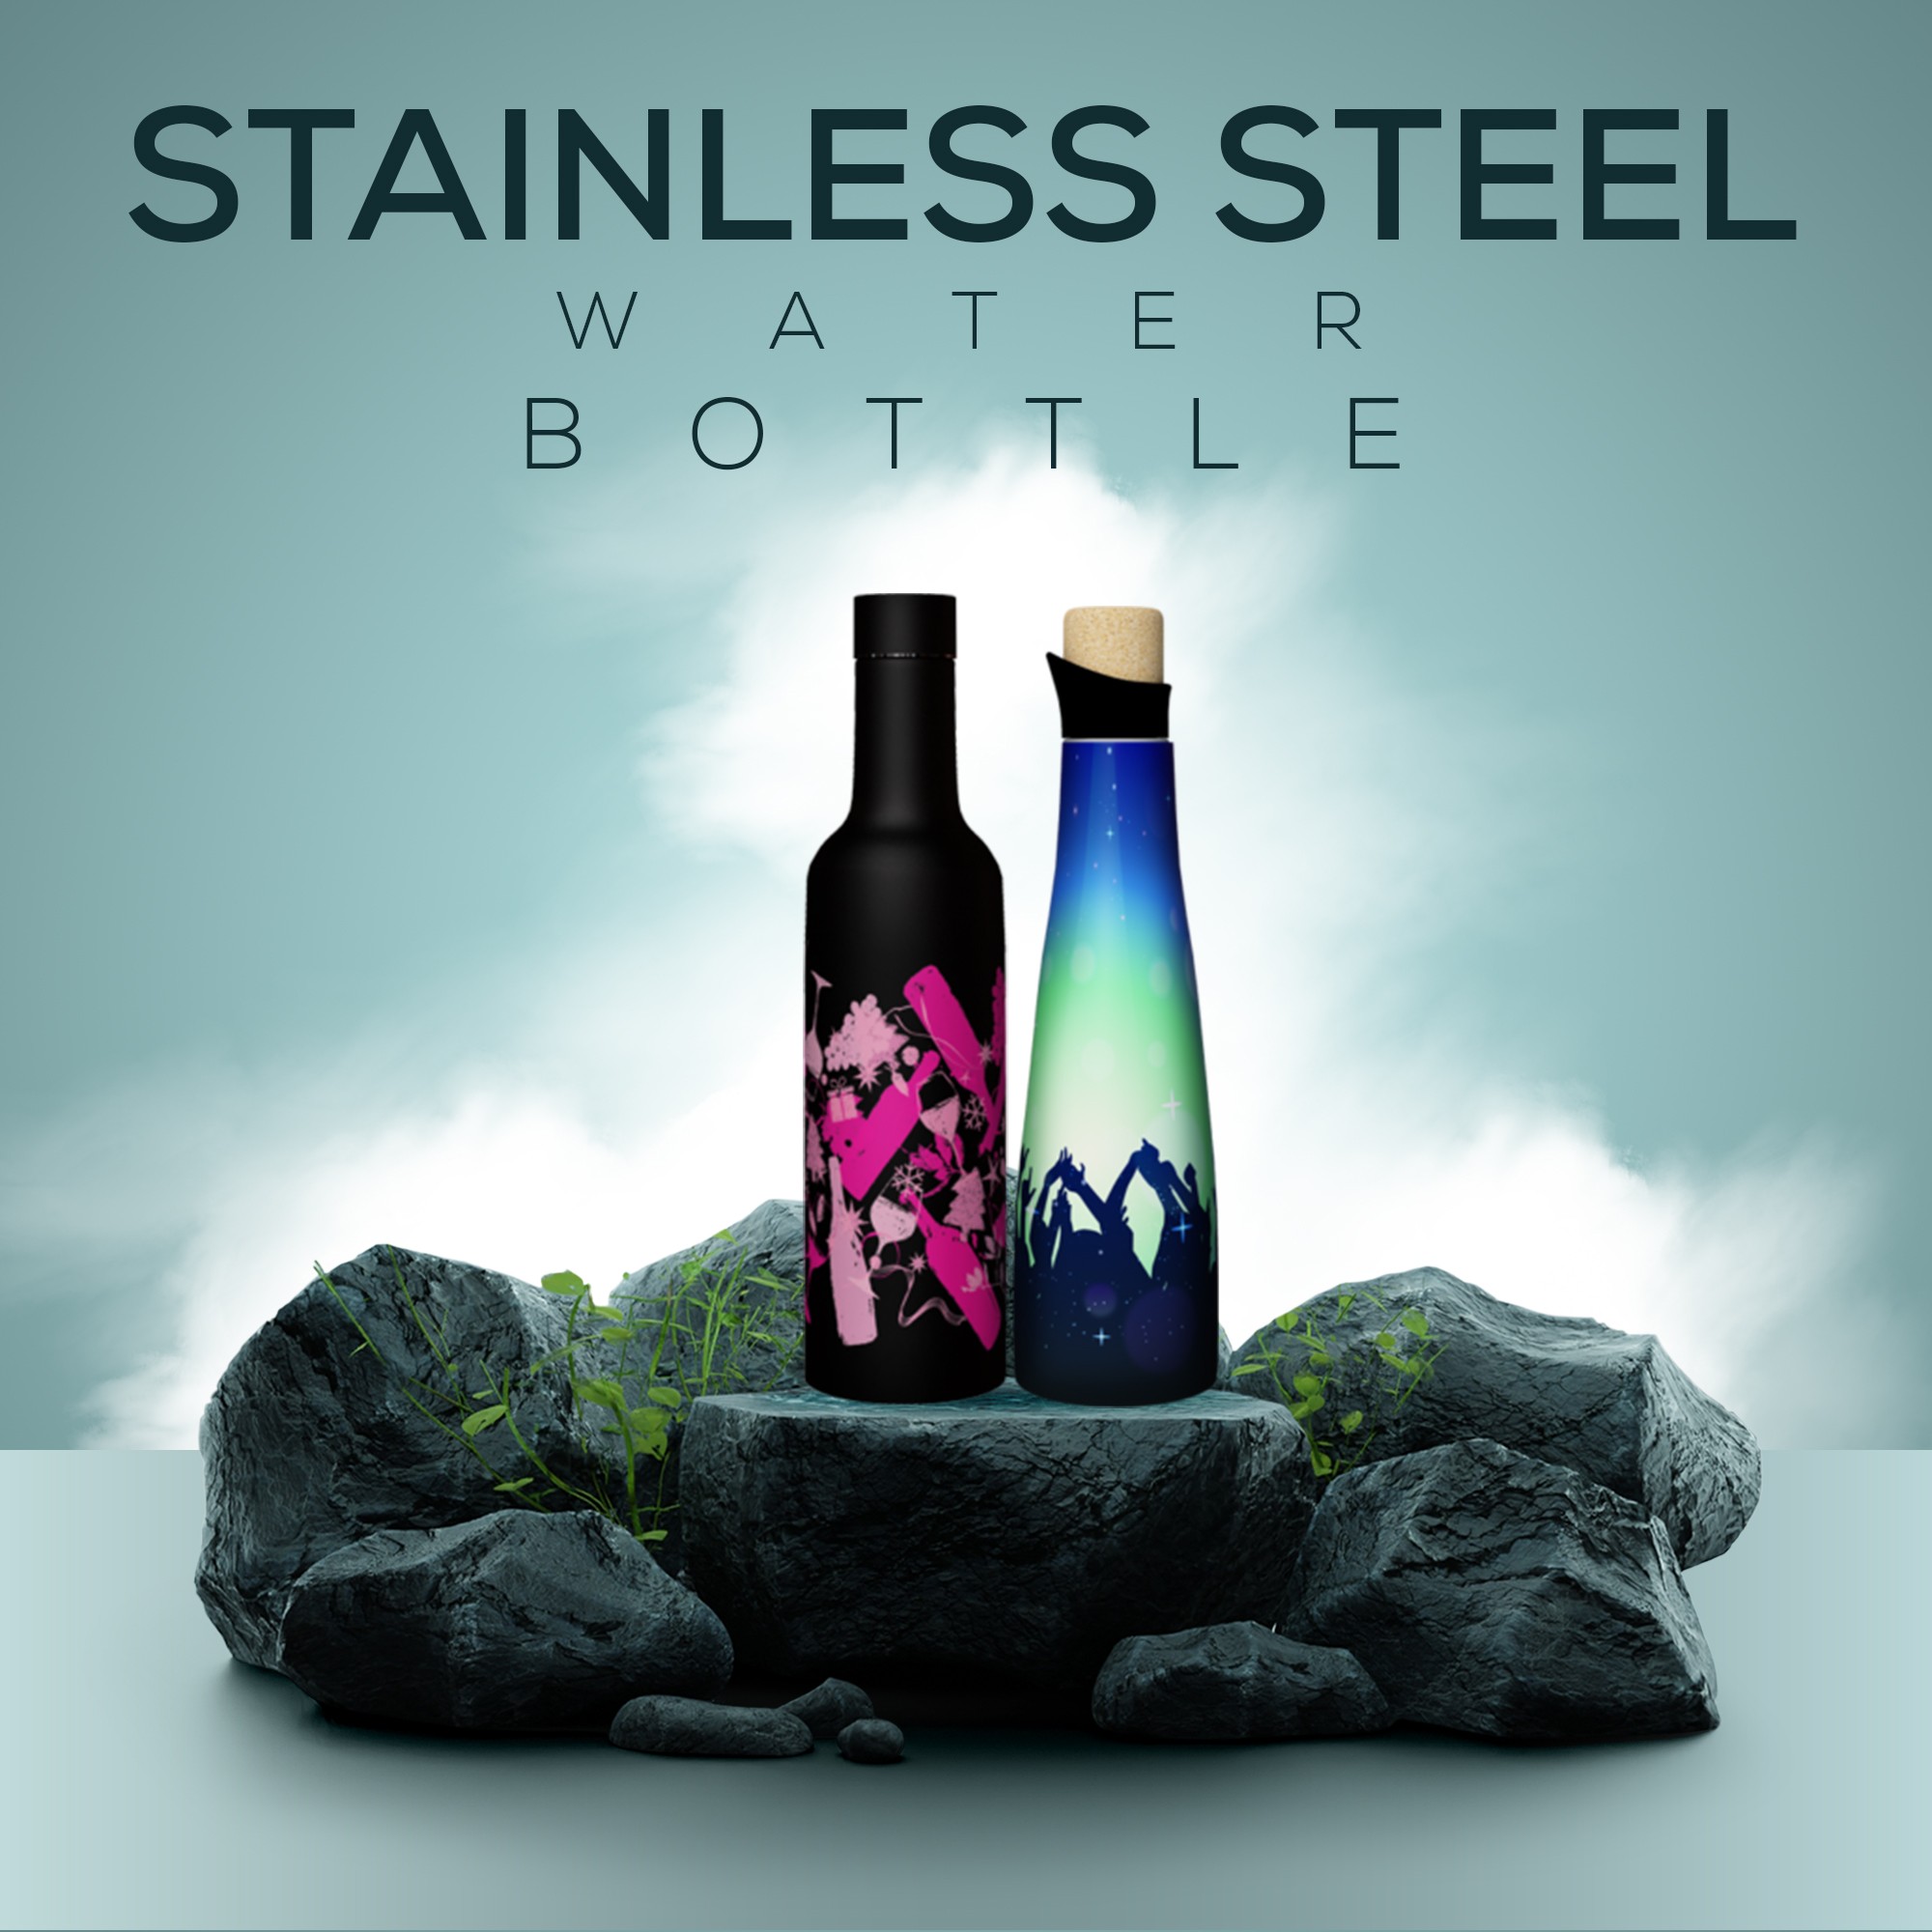 How to choose the best stainless steel water bottles for your needs?